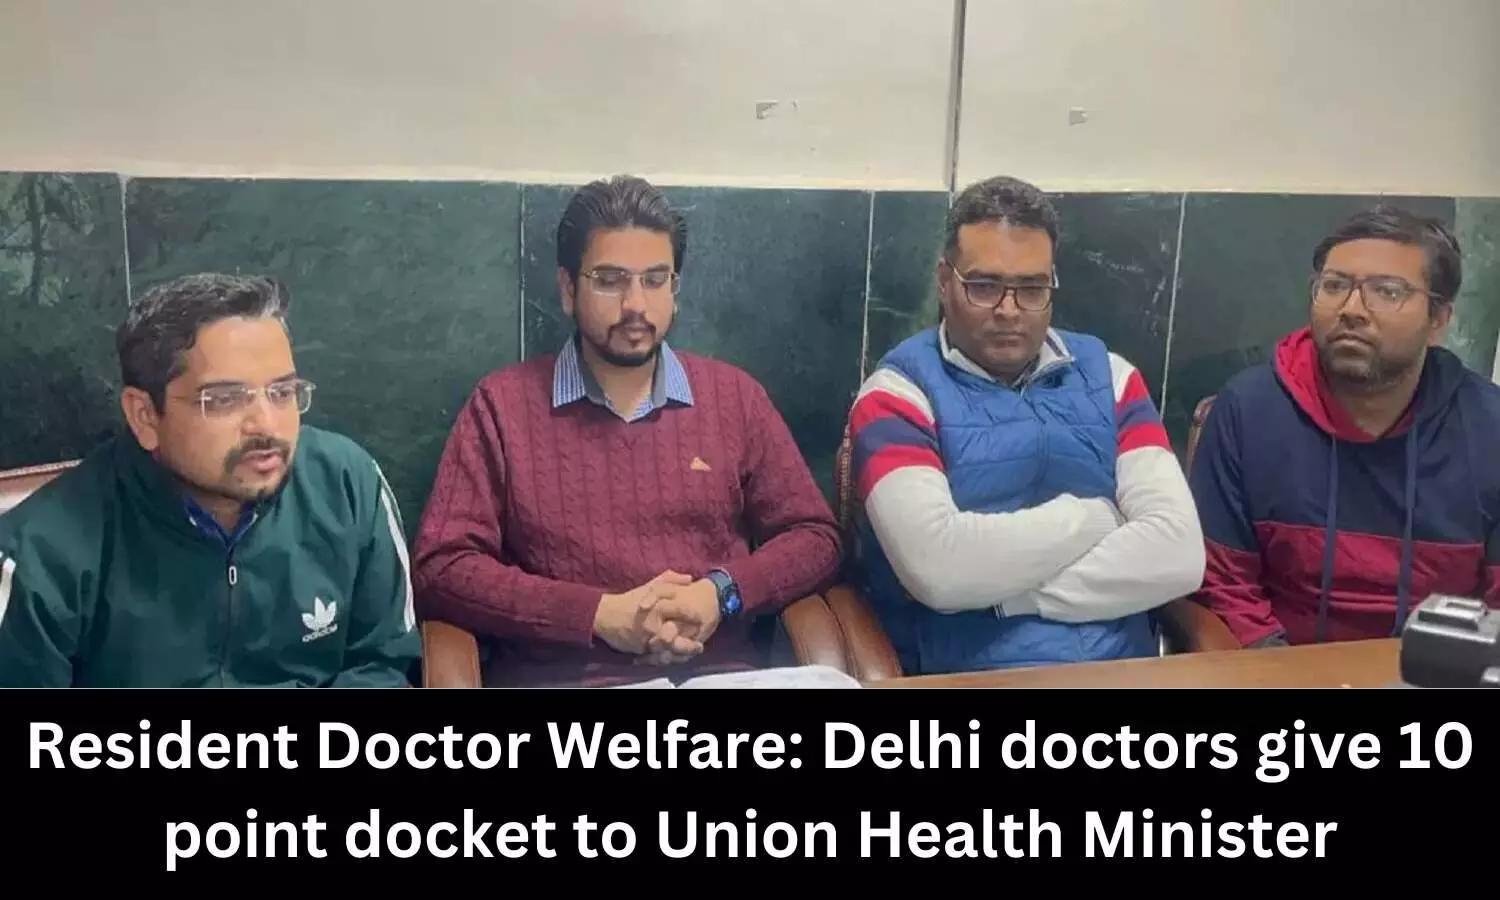 Doctors association submits 10 point docket to Union Health Minister for welfare of resident doctors